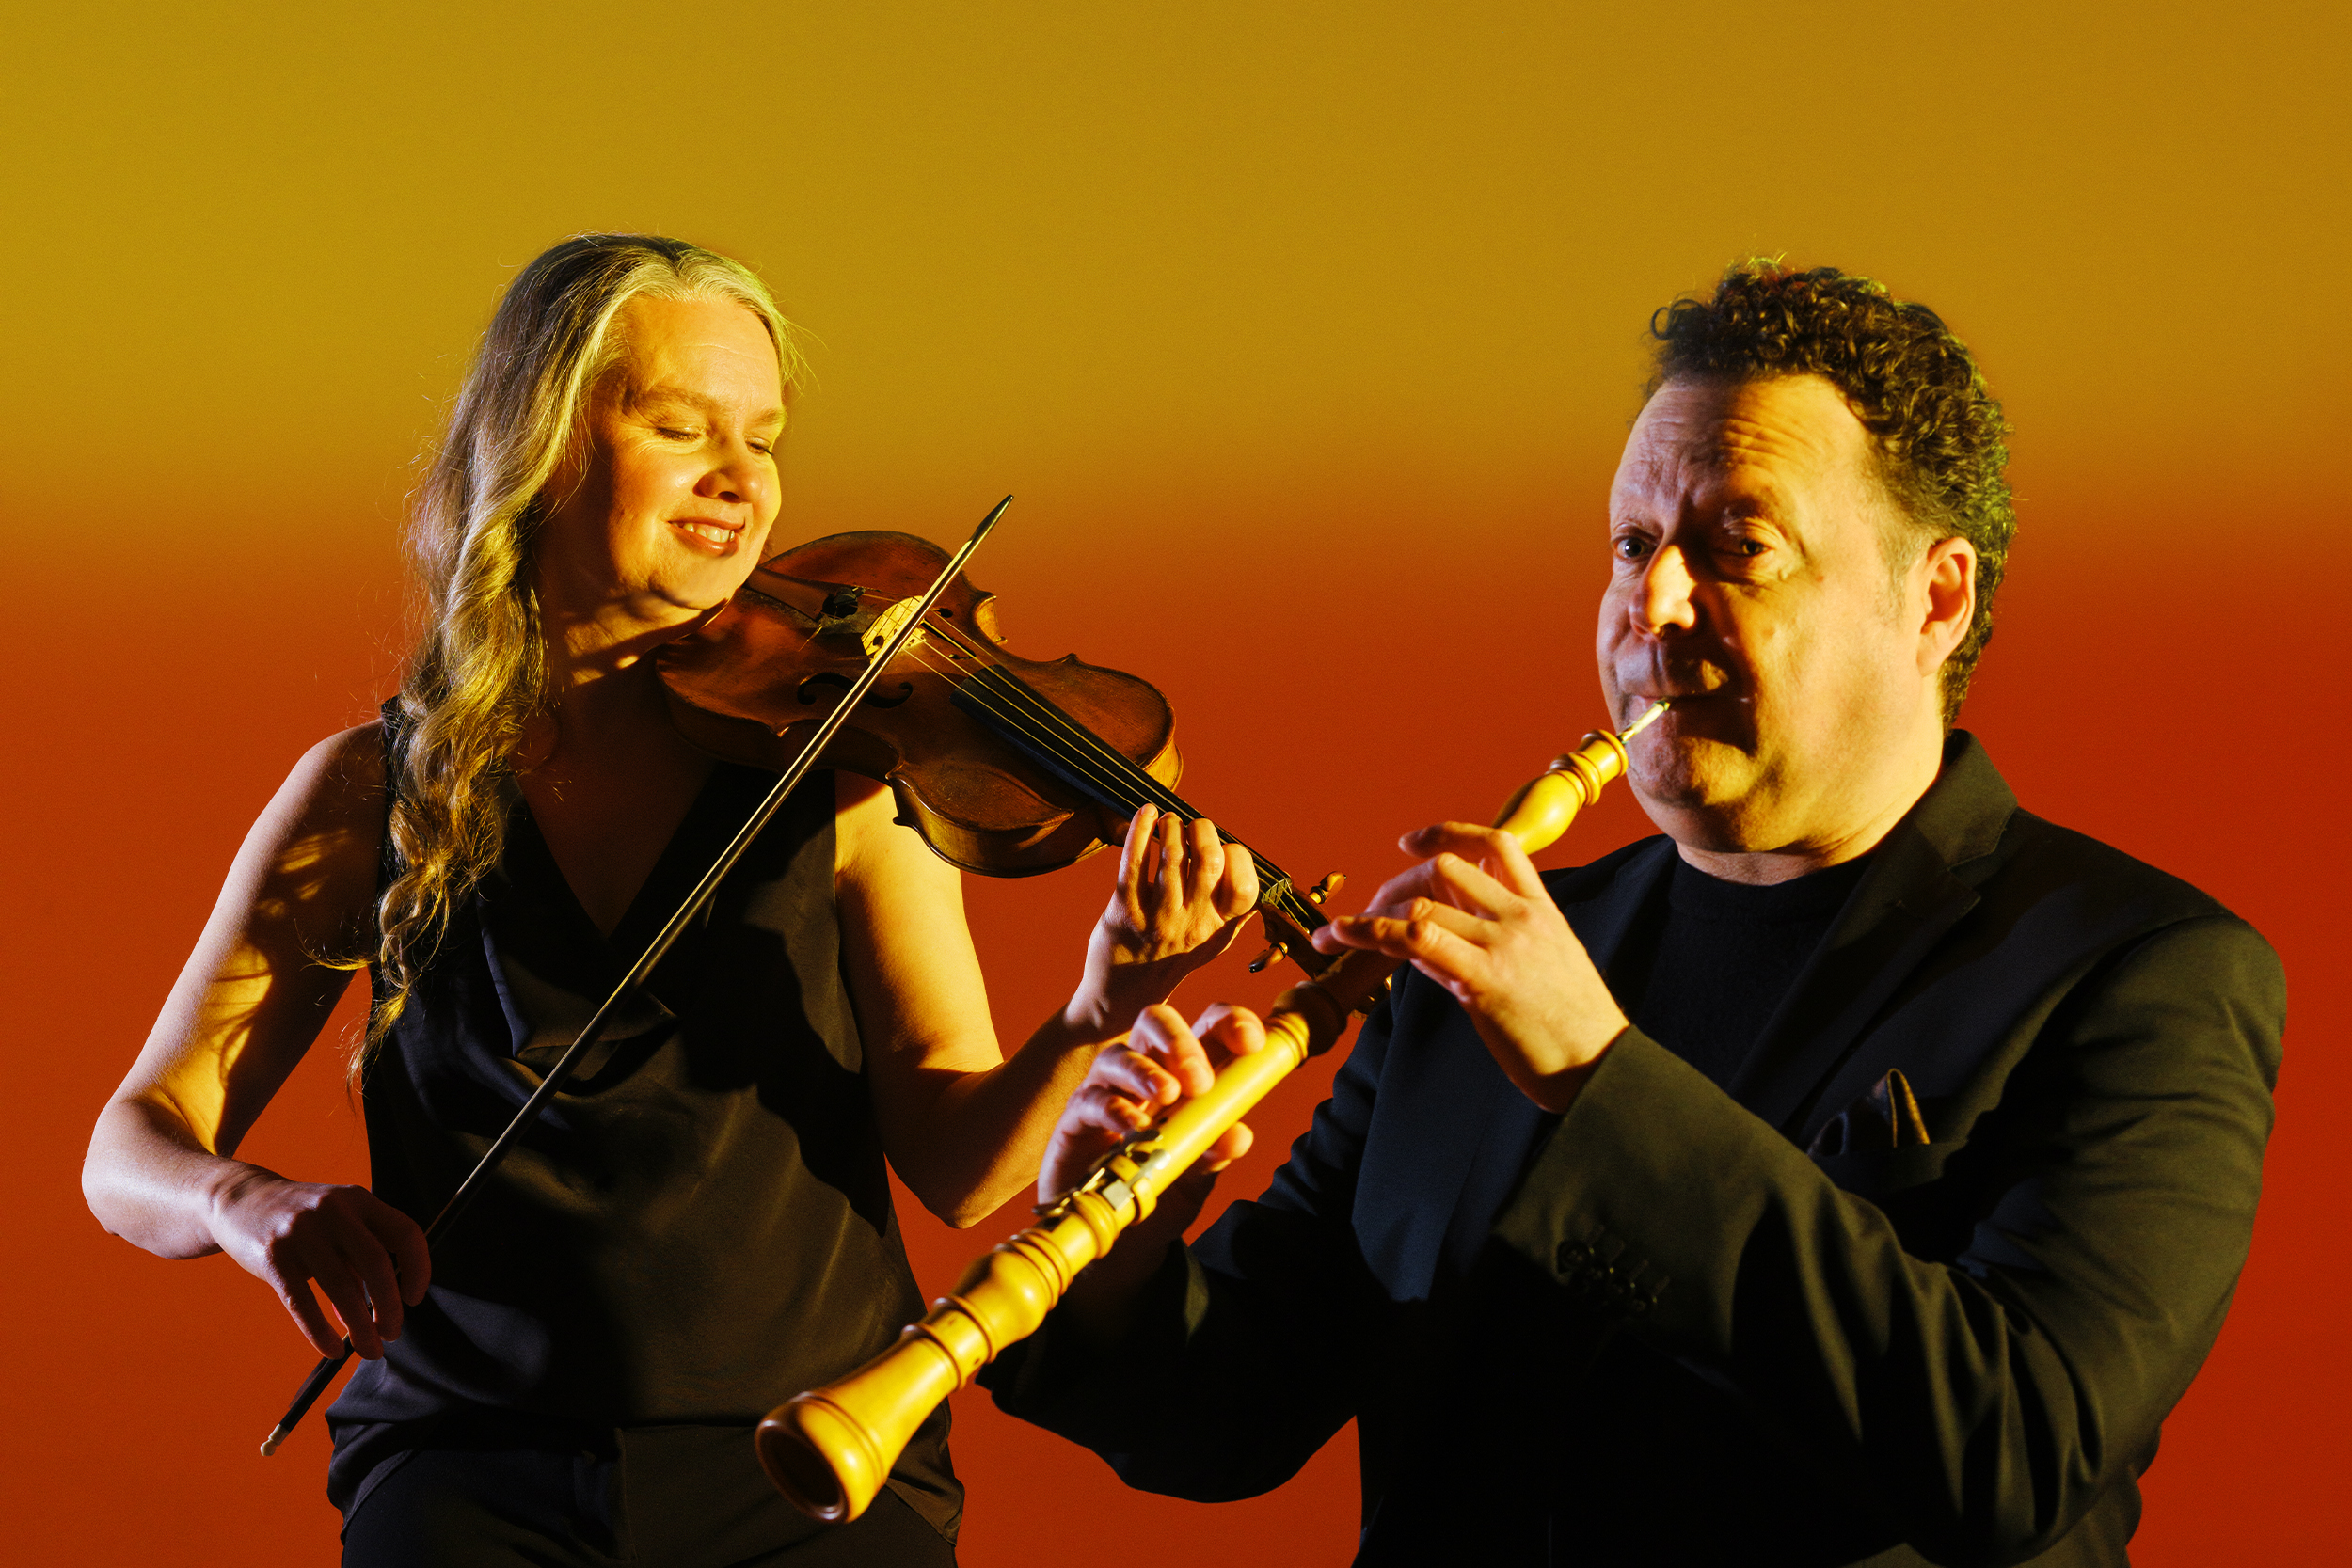 A violinist and oboist perform in a warm studio